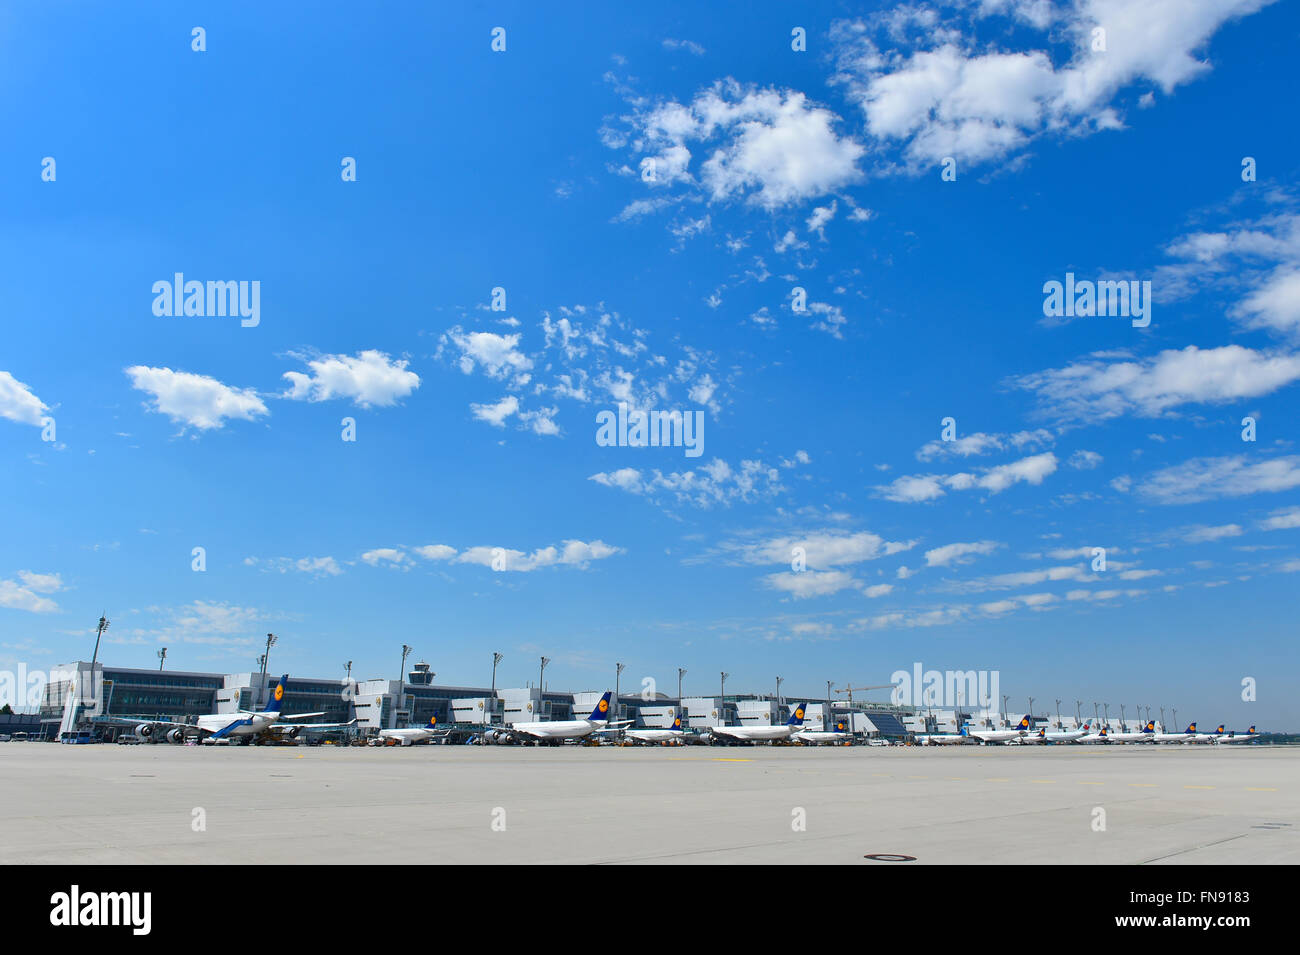 terminal 2, tower, building, aircraft, airport, overview, panorama, view, line up, aircraft, airplane, plane, sun, blue sky, Stock Photo